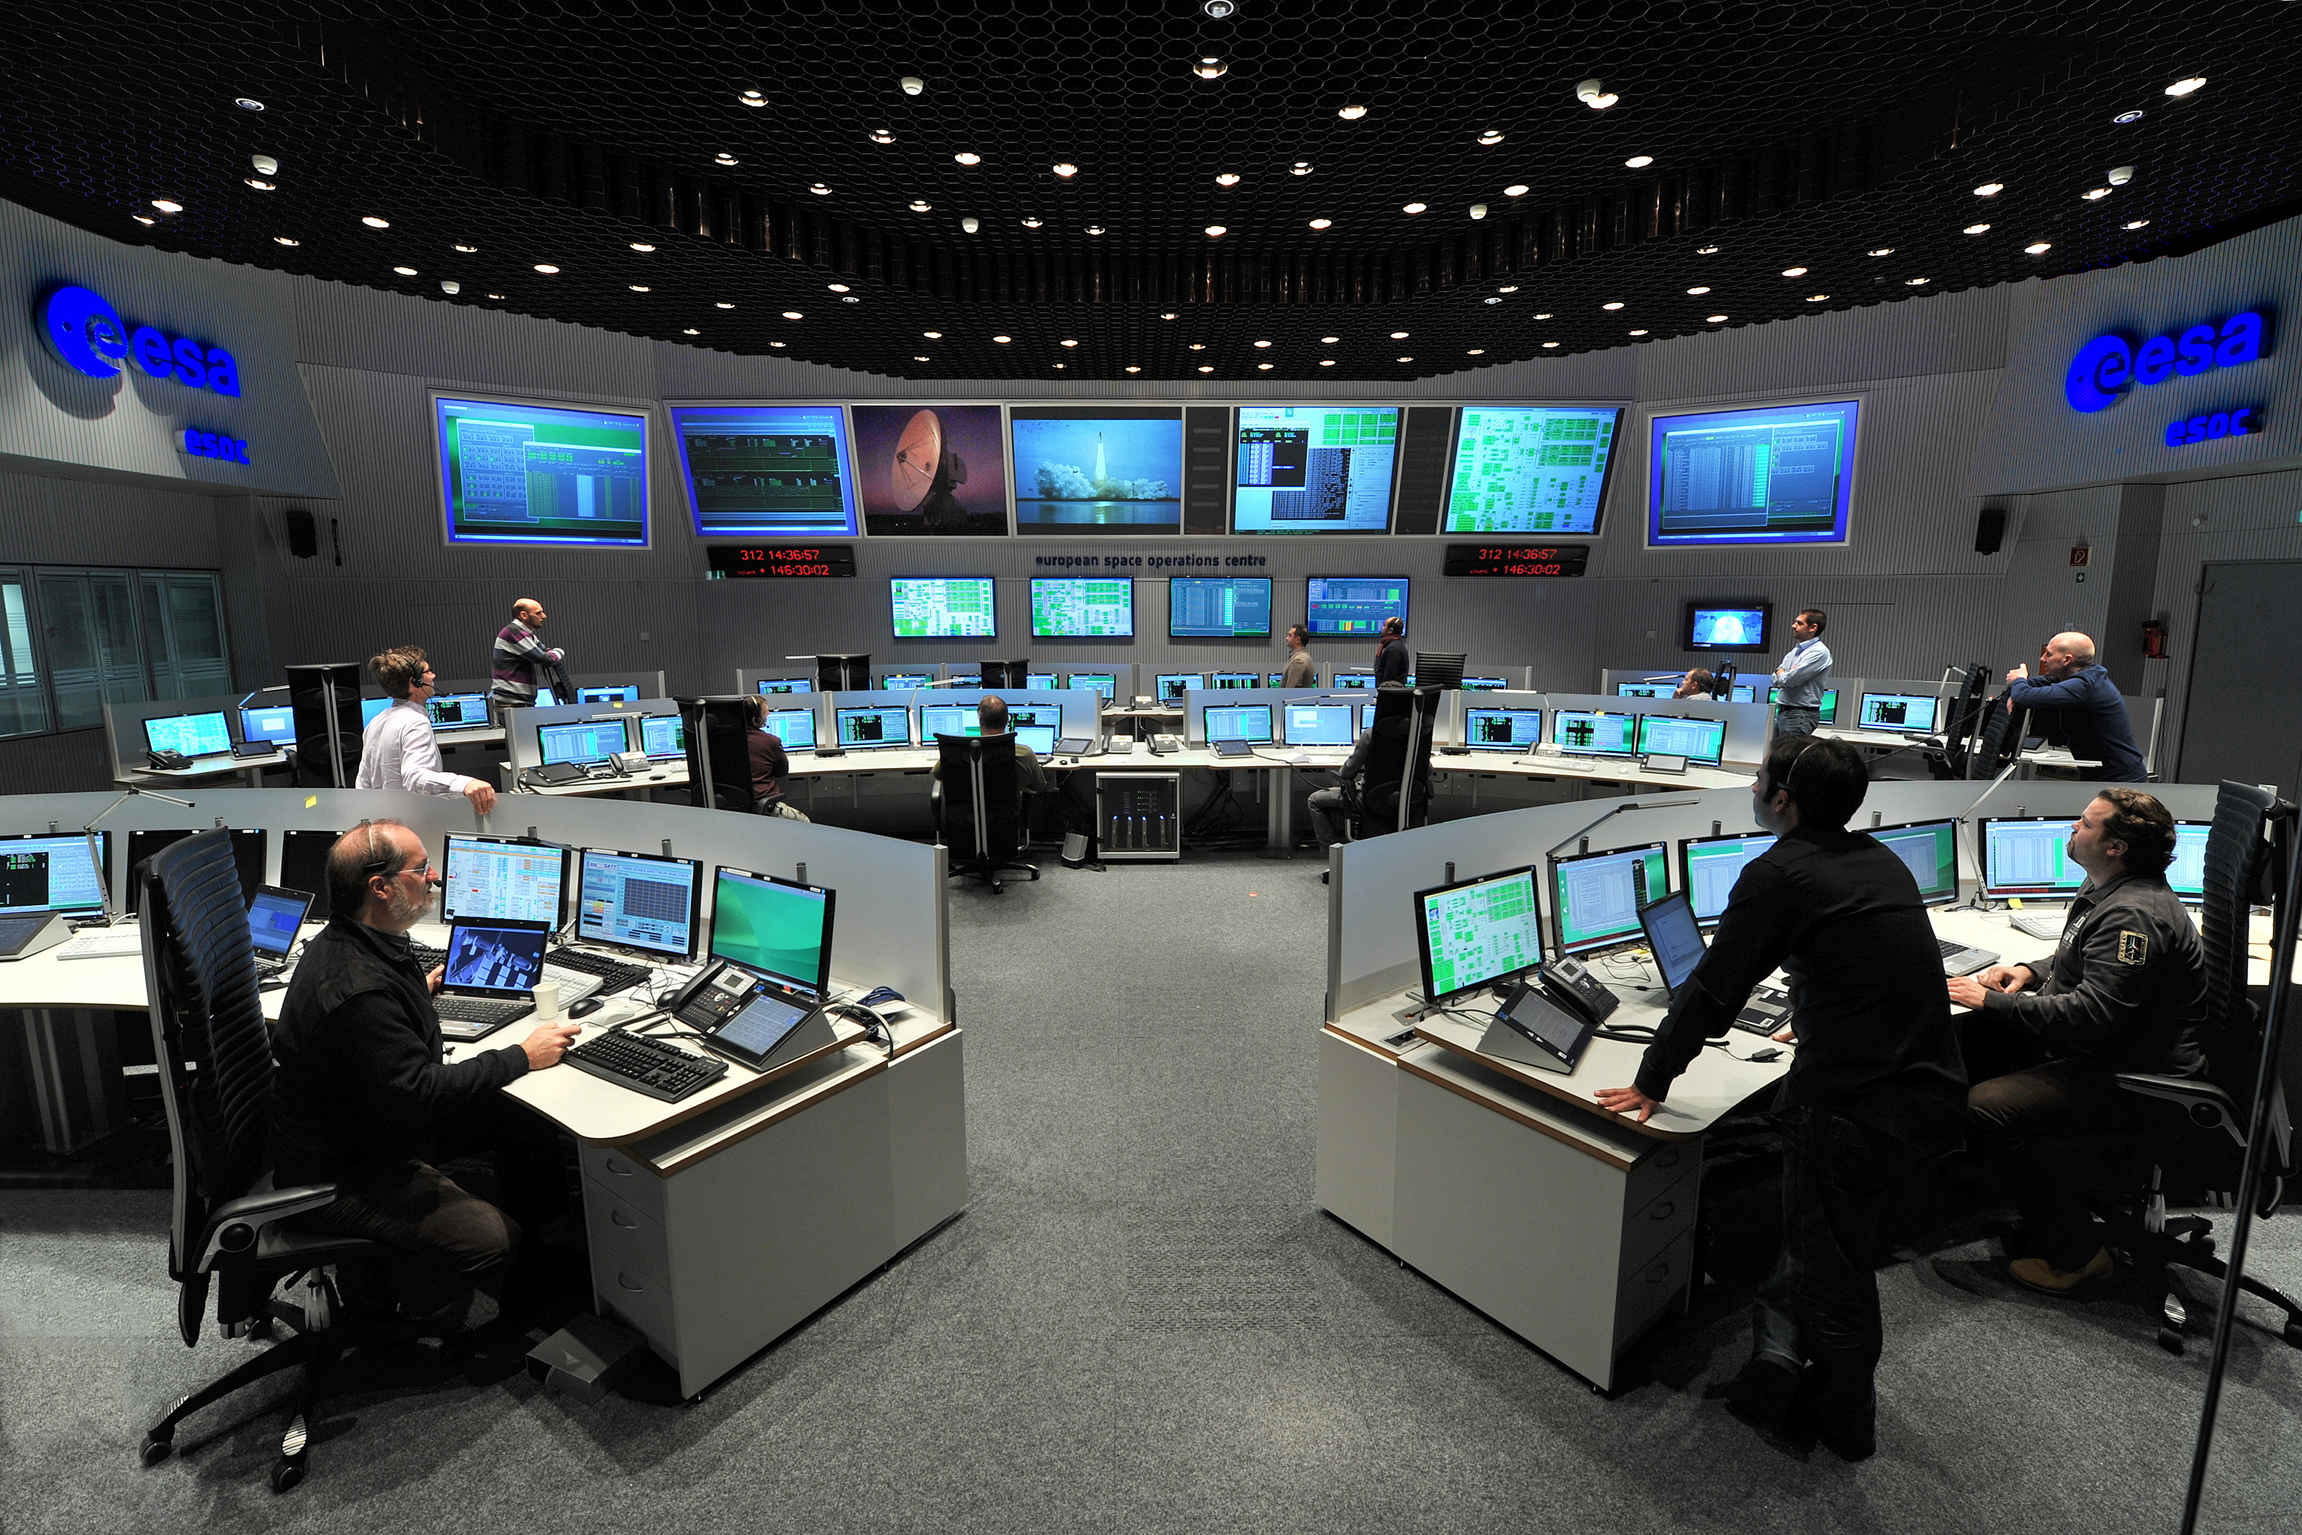 Space in Images - 2012 - 05 - ESA control room2302 x 1535